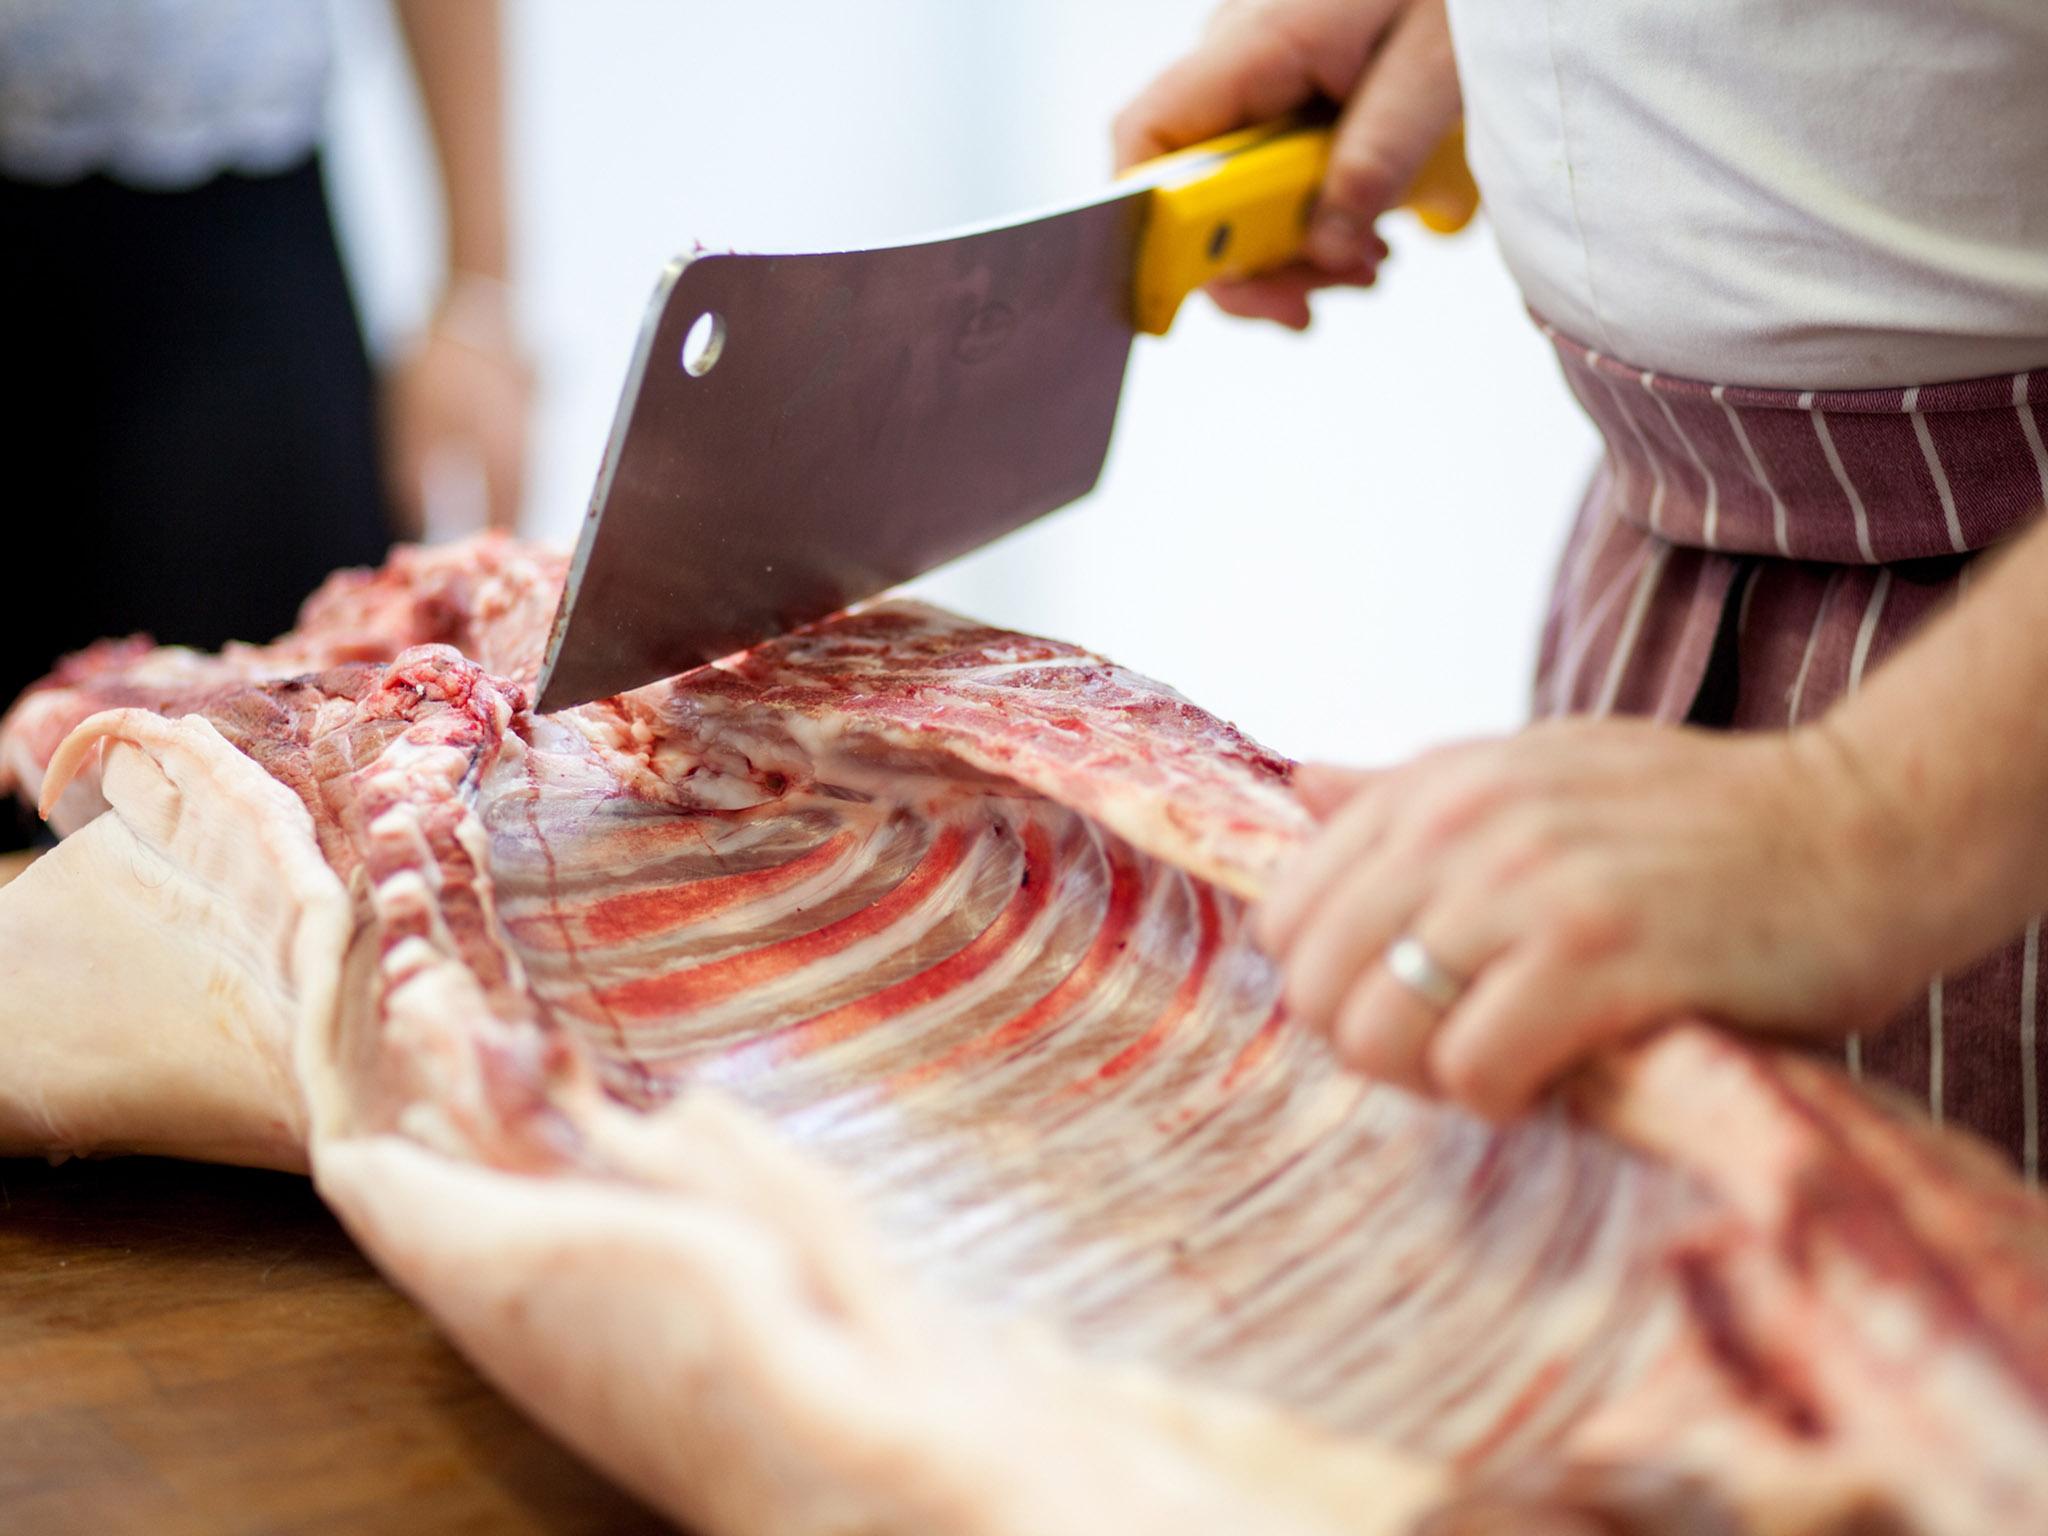 Hartstone, chef of La Fosse, uses as much of the pig carcass as possible